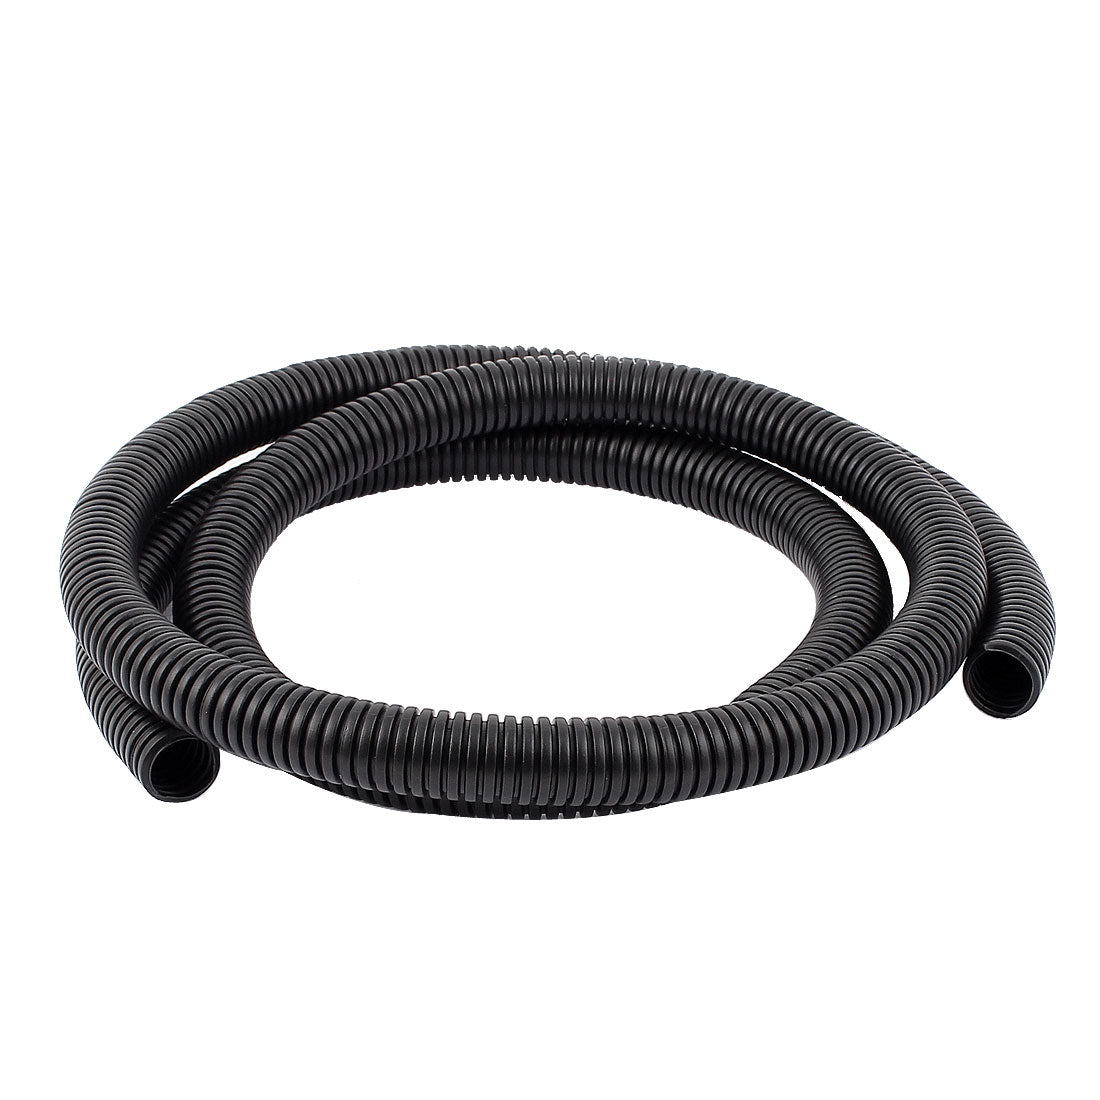 uxcell Uxcell 1.6 M 15 x 18 mm Plastic Corrugated Conduit Tube for Garden,Office Black